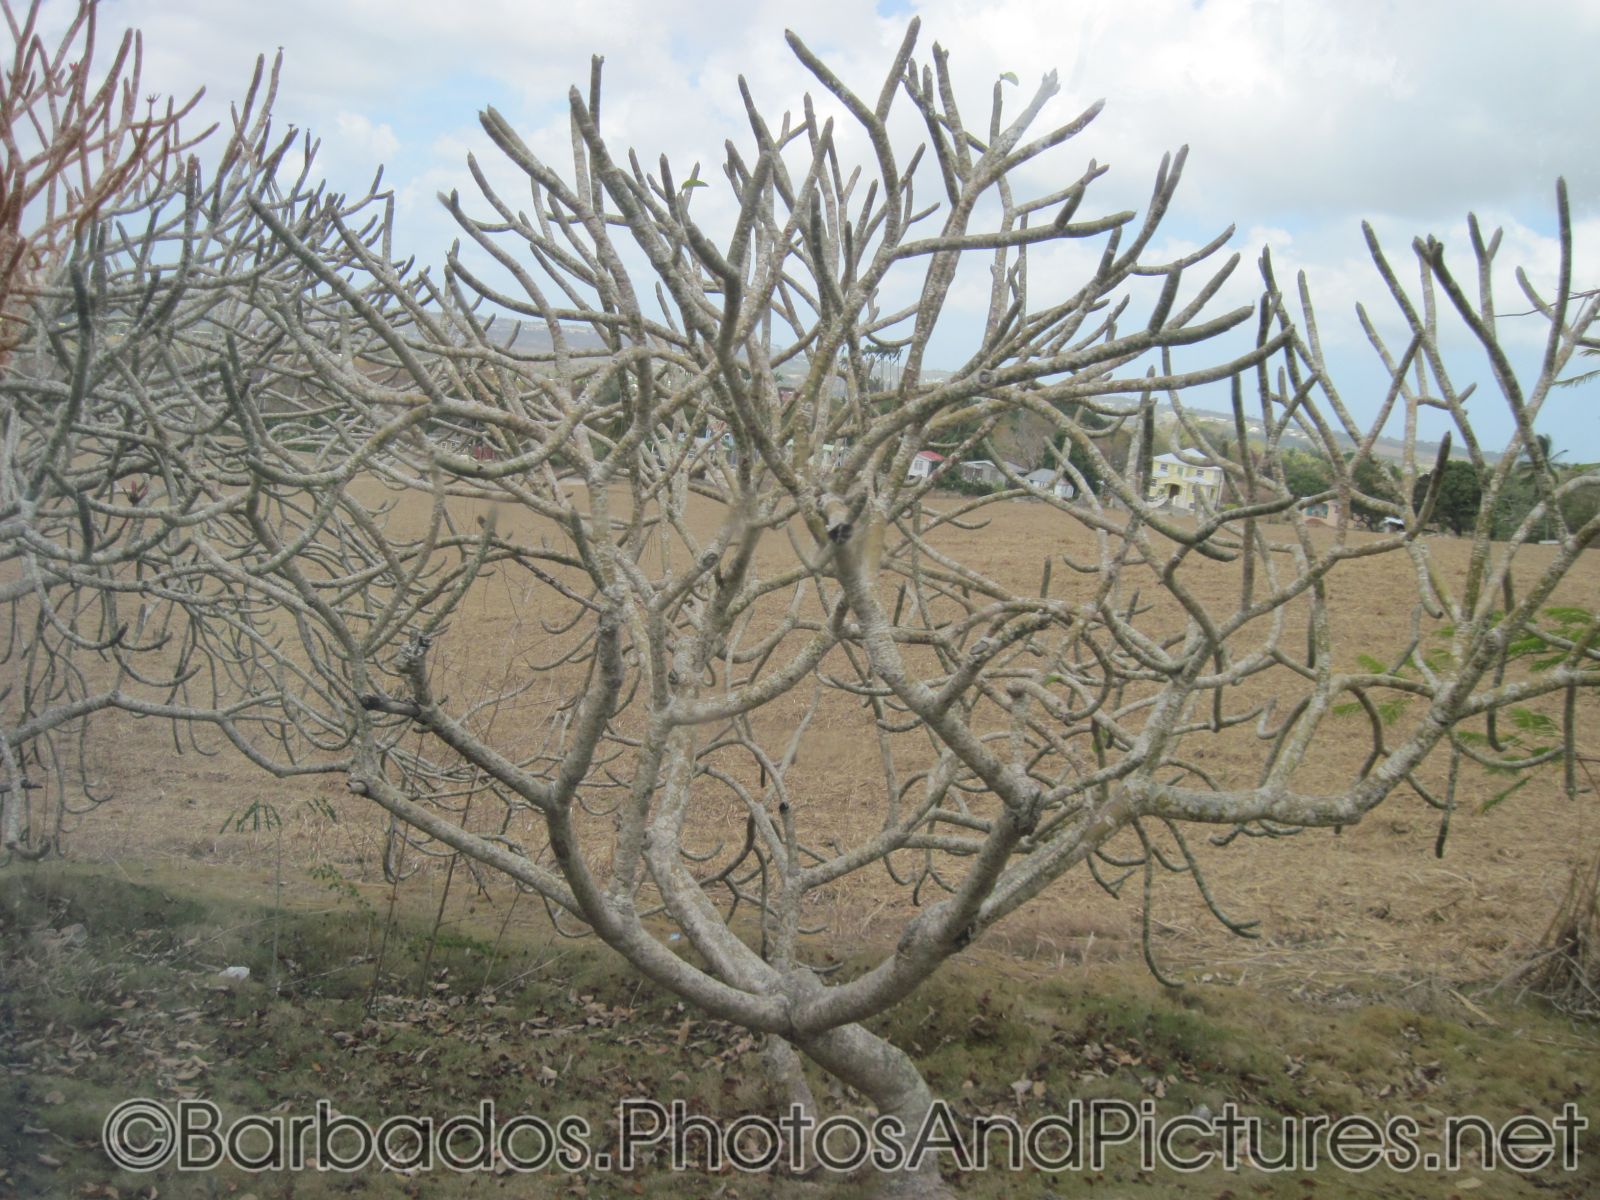 Tree without leaves in Barbados.jpg
